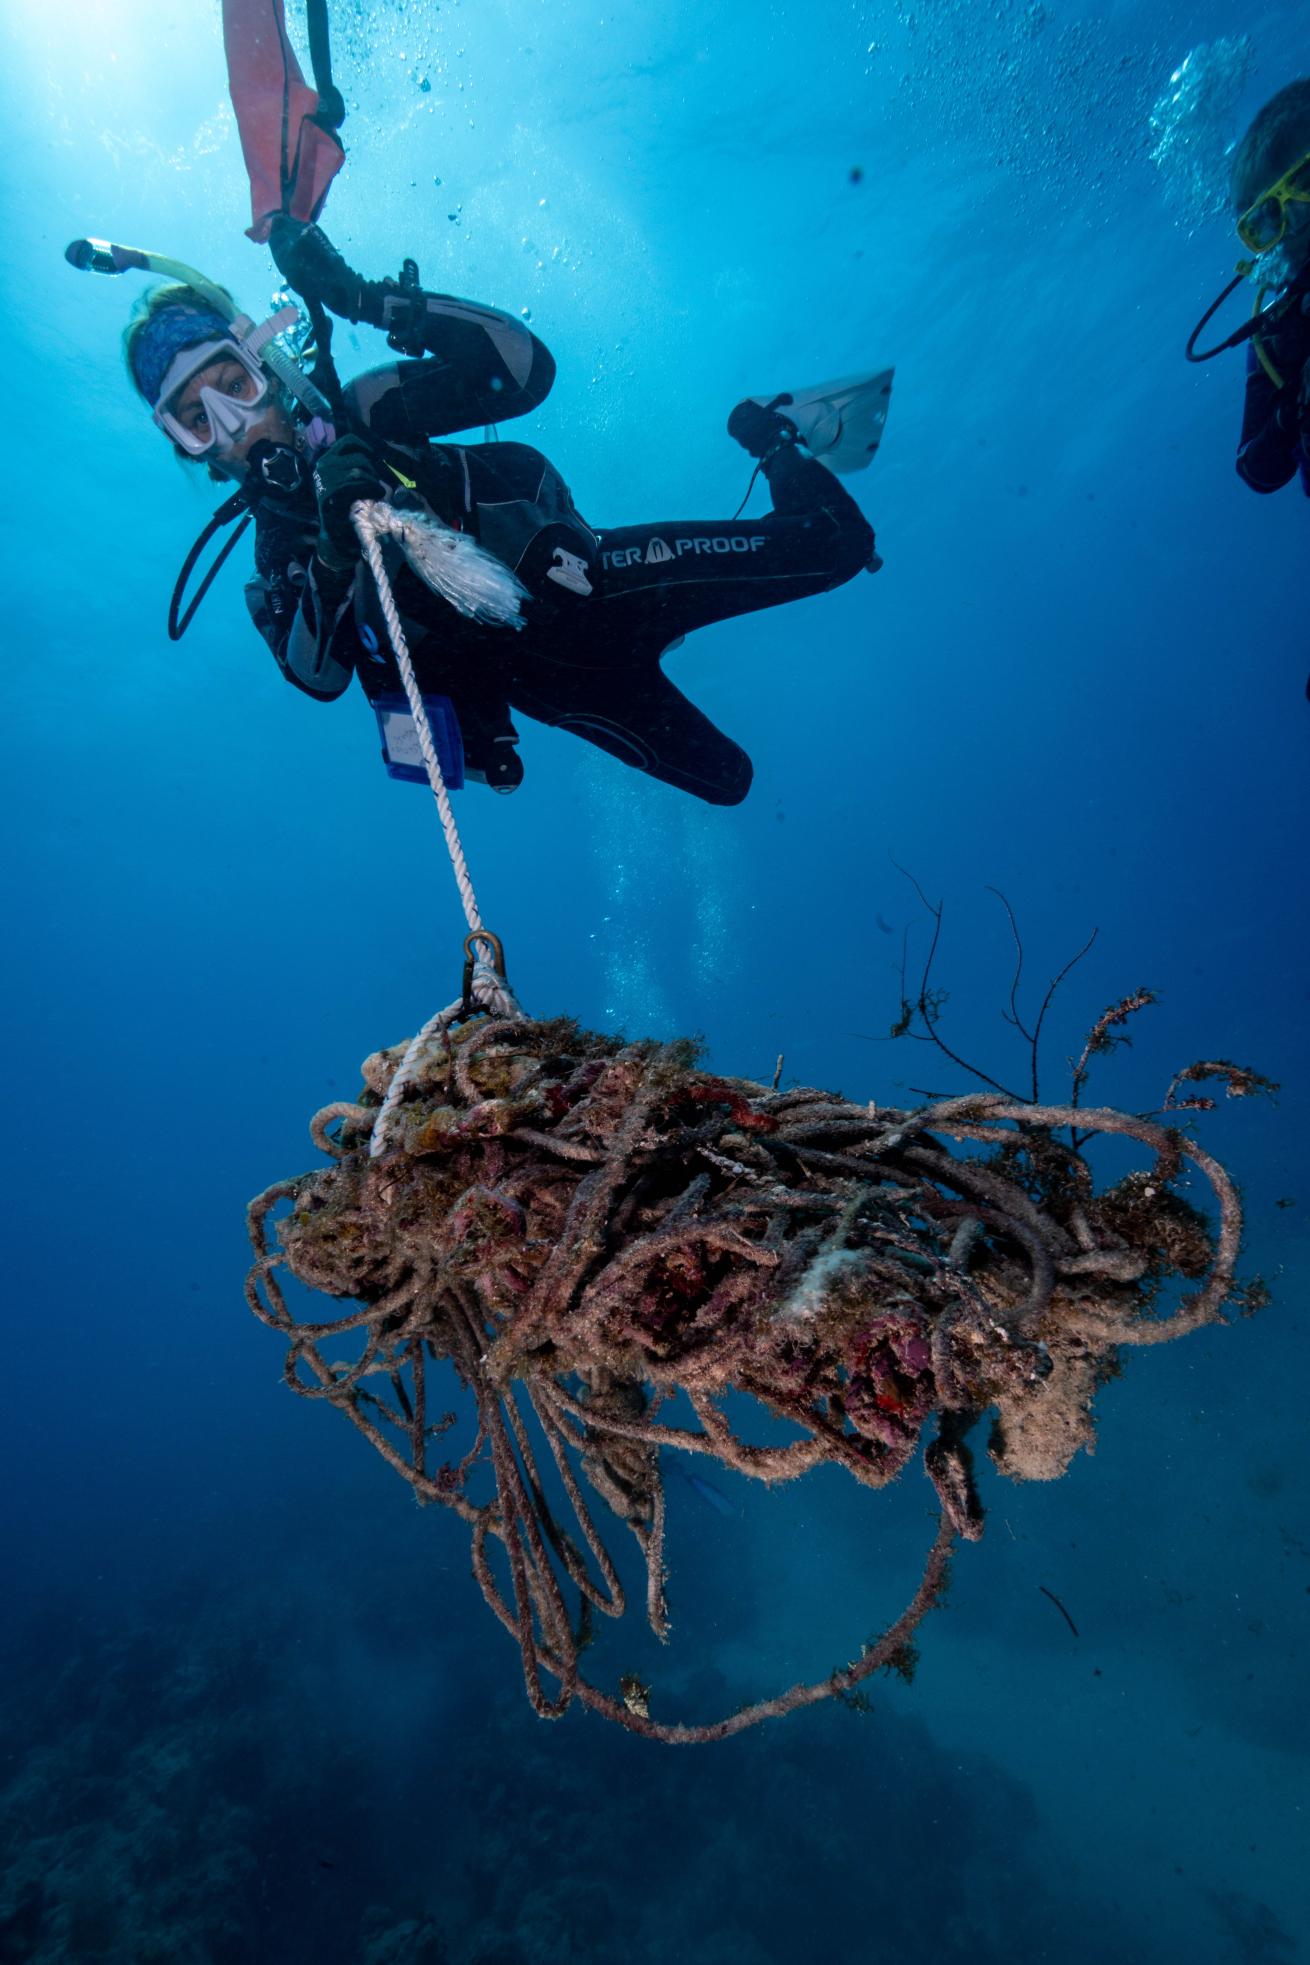 A diver lifts trash from the seafloor